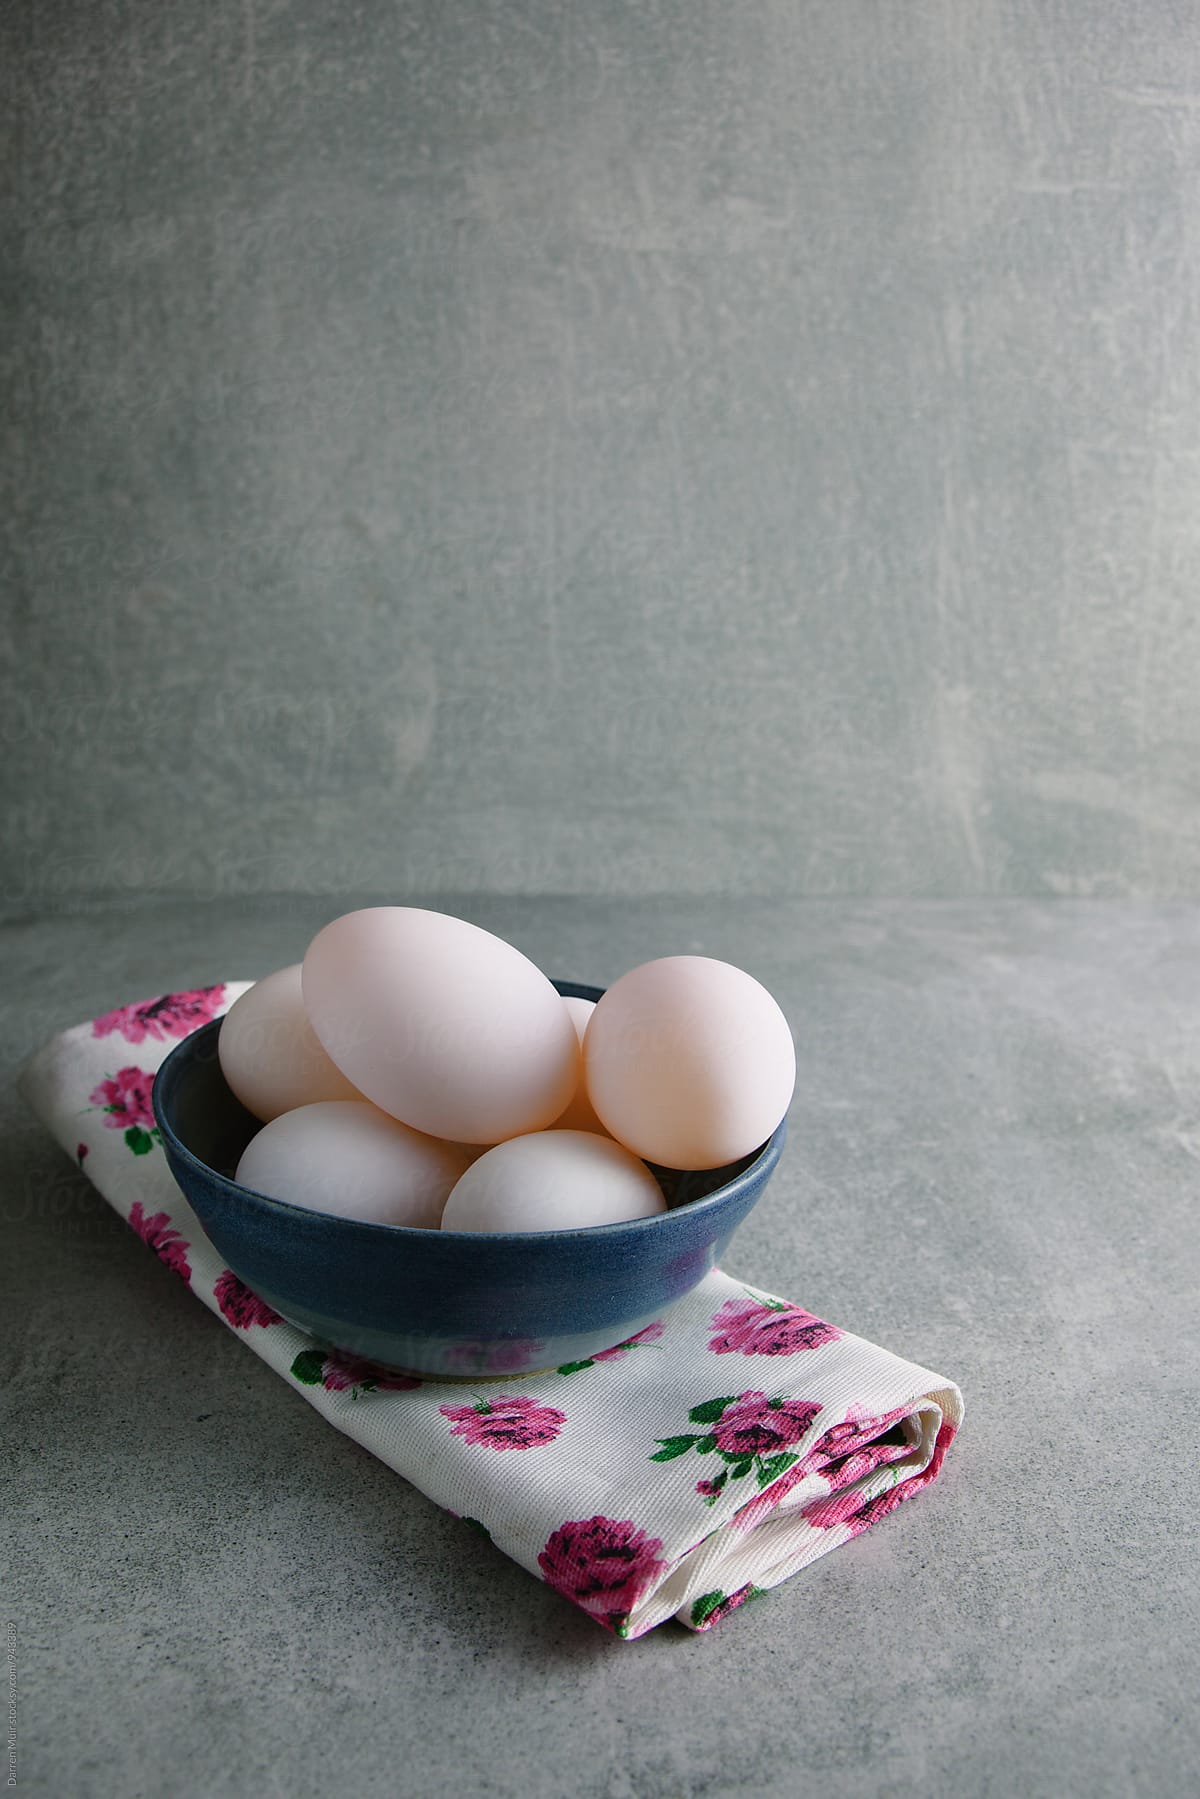 Duck eggs in a blue bowl.